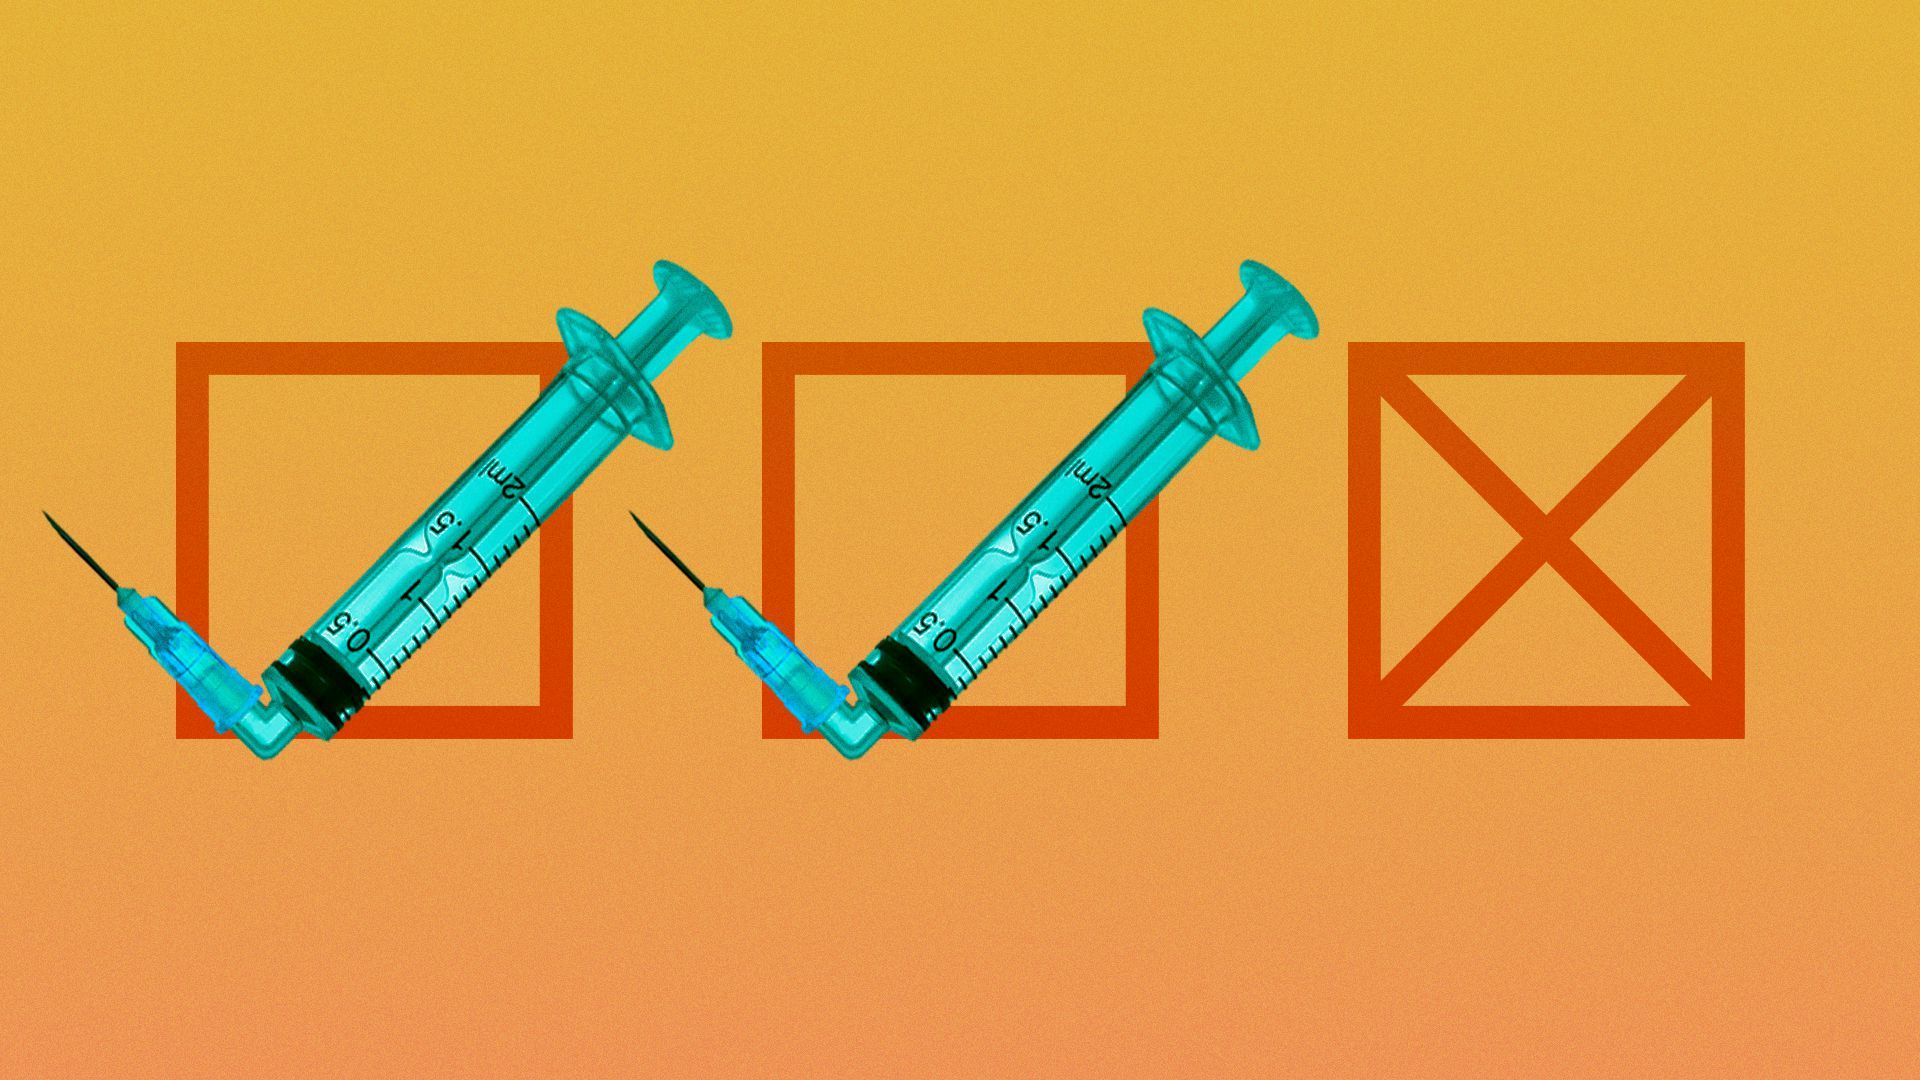 Illustration of the first two boxes have a checkmark made of a syringe, and the third box has a large X in the middle.